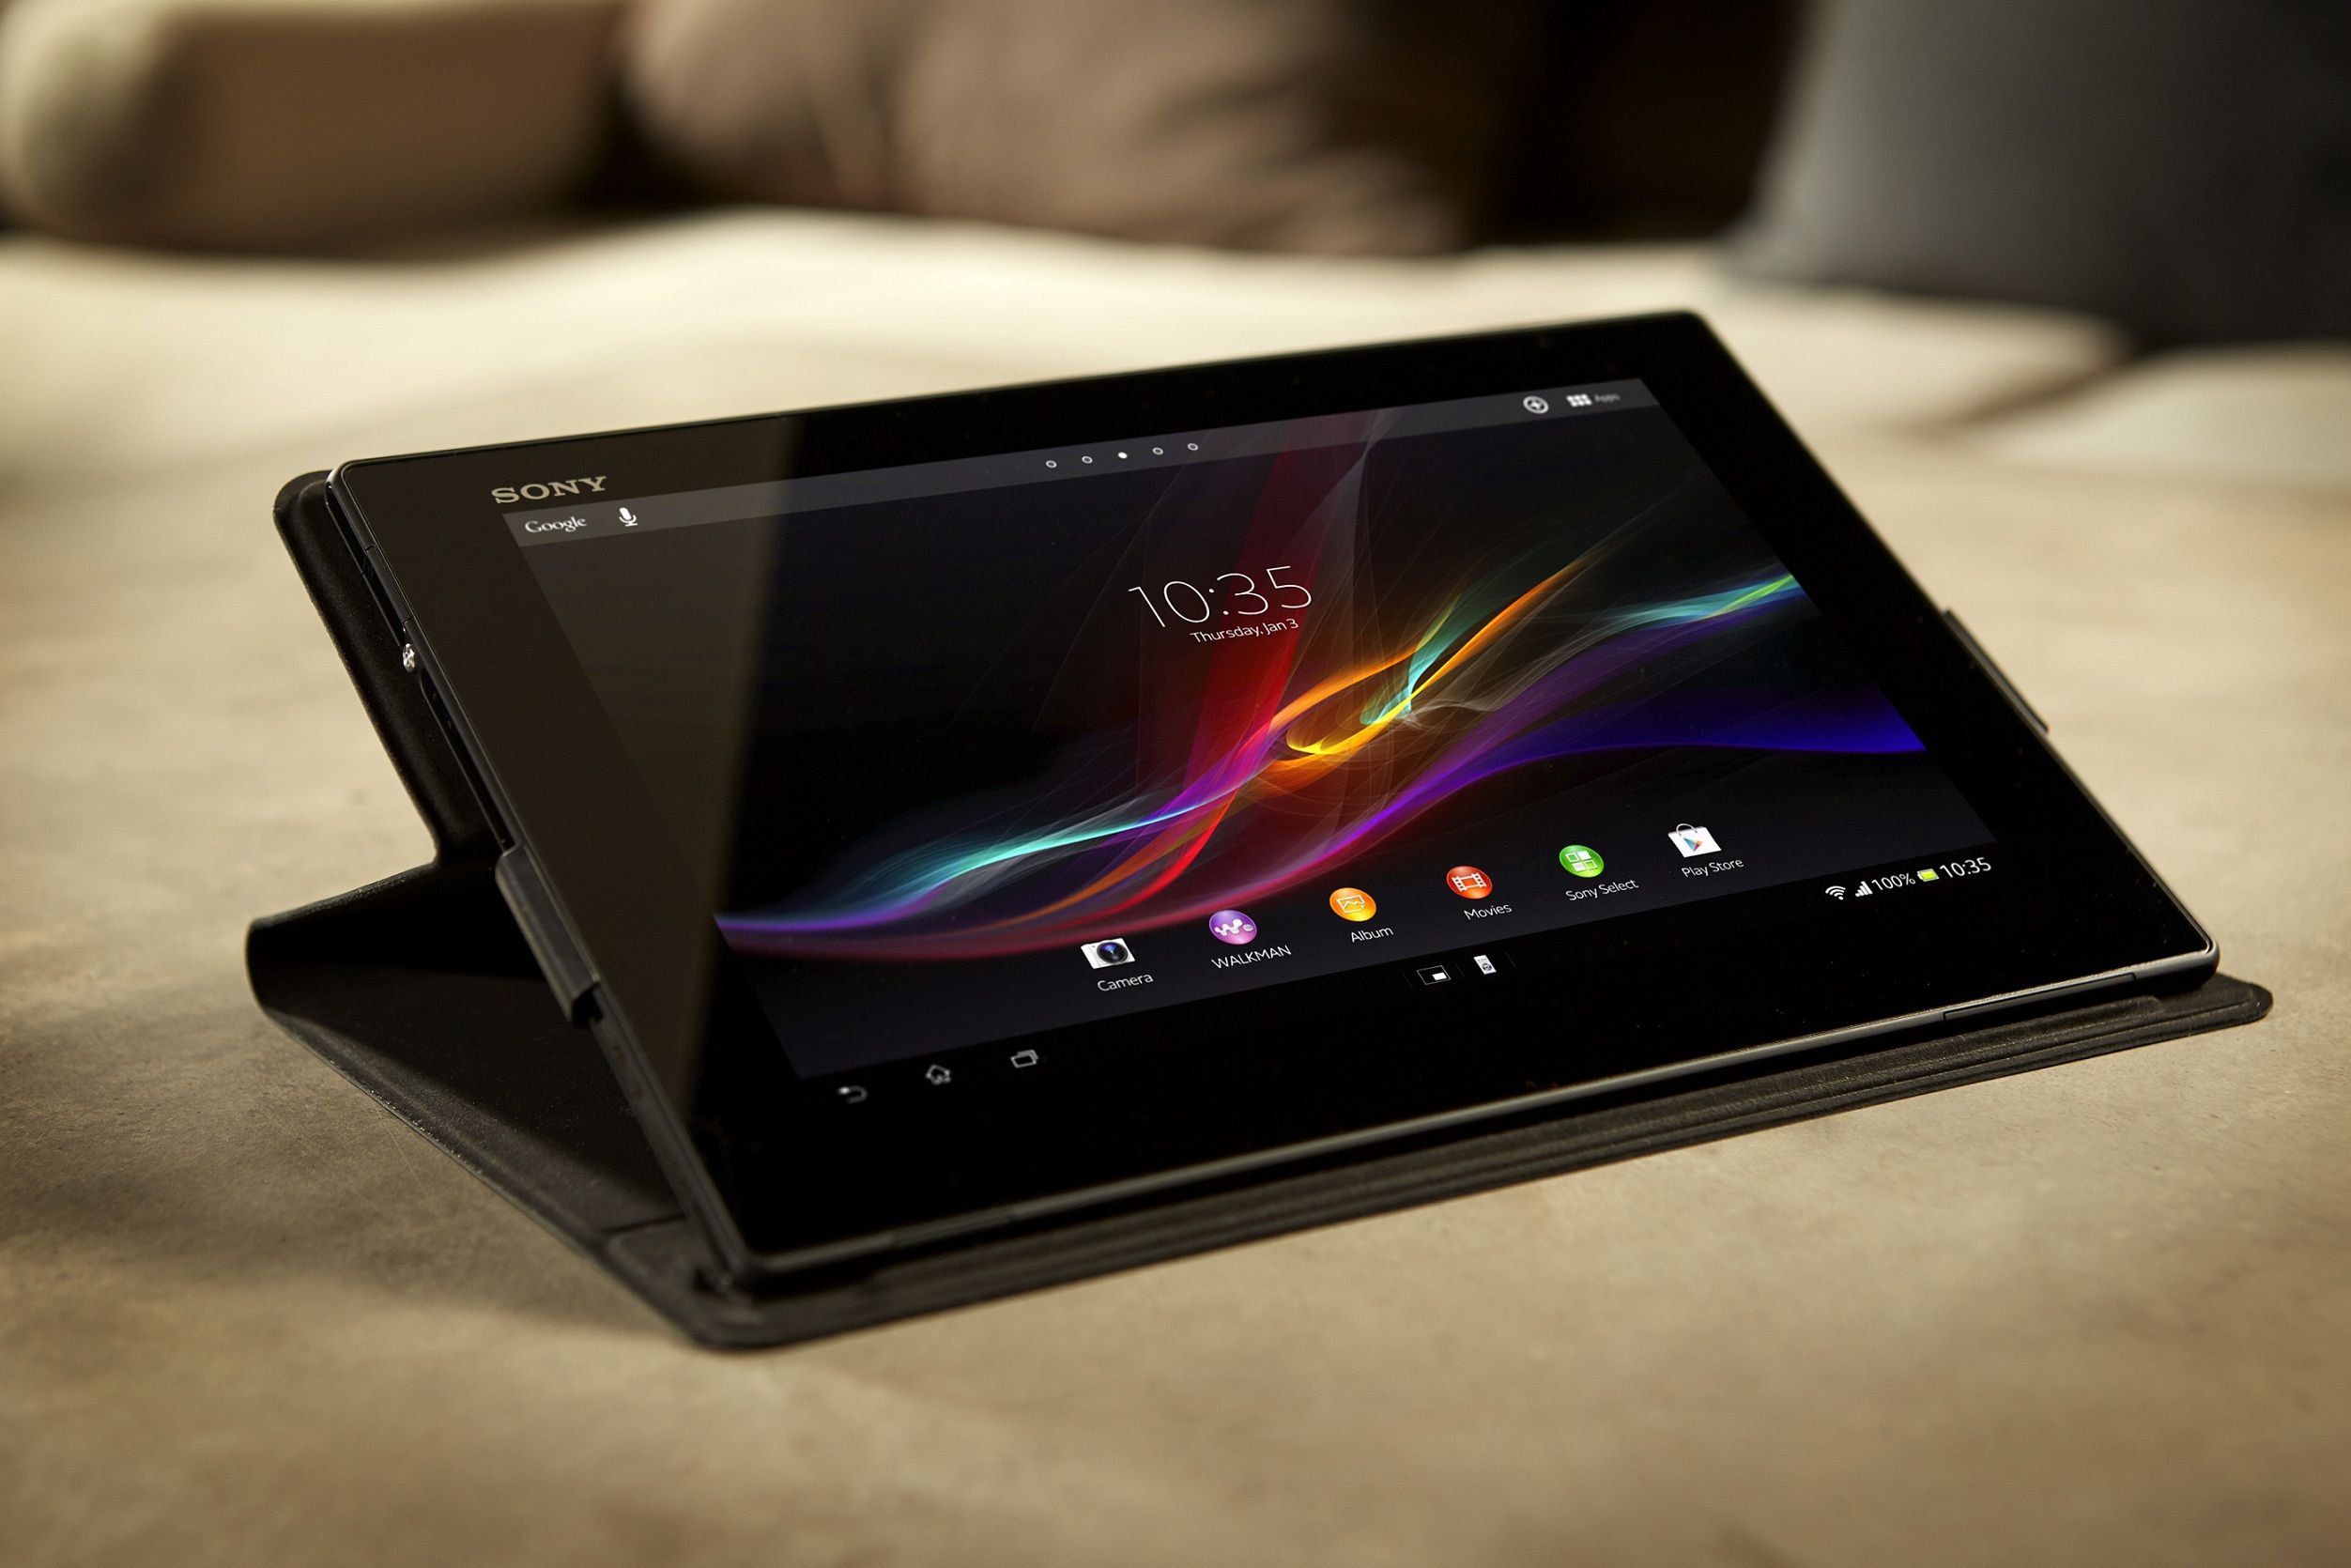 Sony Xperia Tablet Z4: high-end entertainment for Israeli users